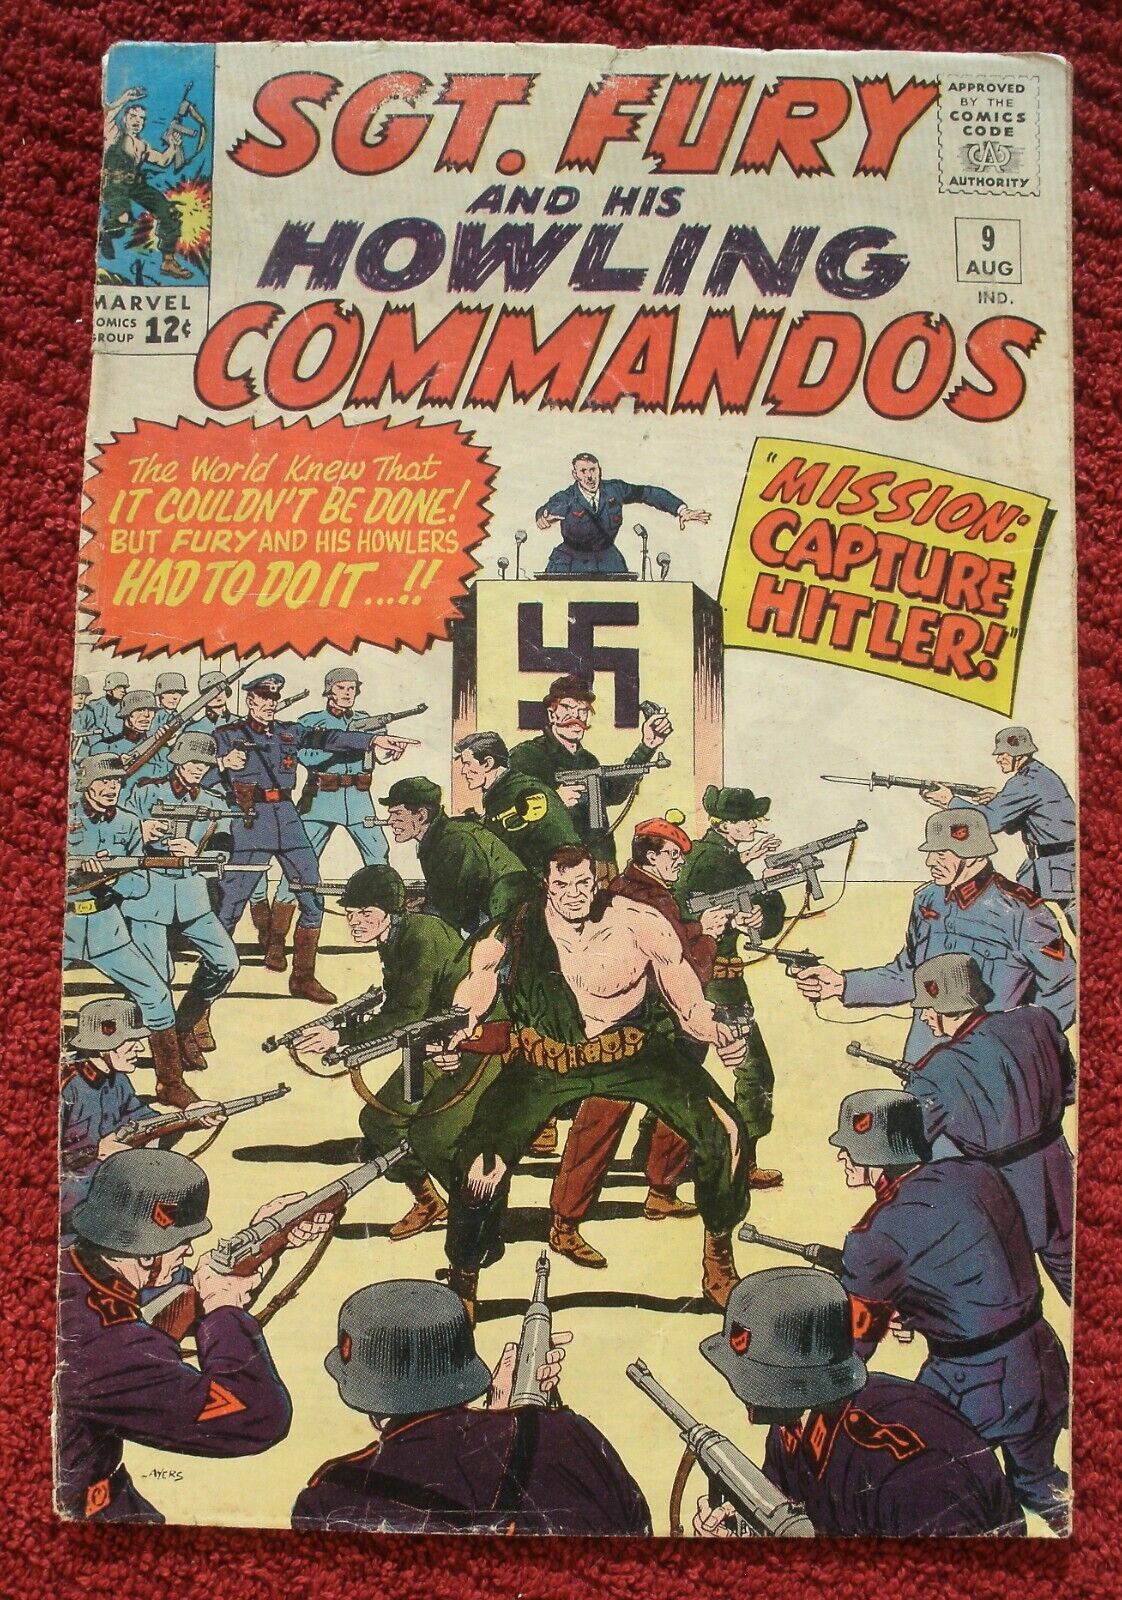 Sgt. Fury & His Howling Commandoes 9 Aug. 1964 Marvel 12¢ Capturing Hitler! VG!